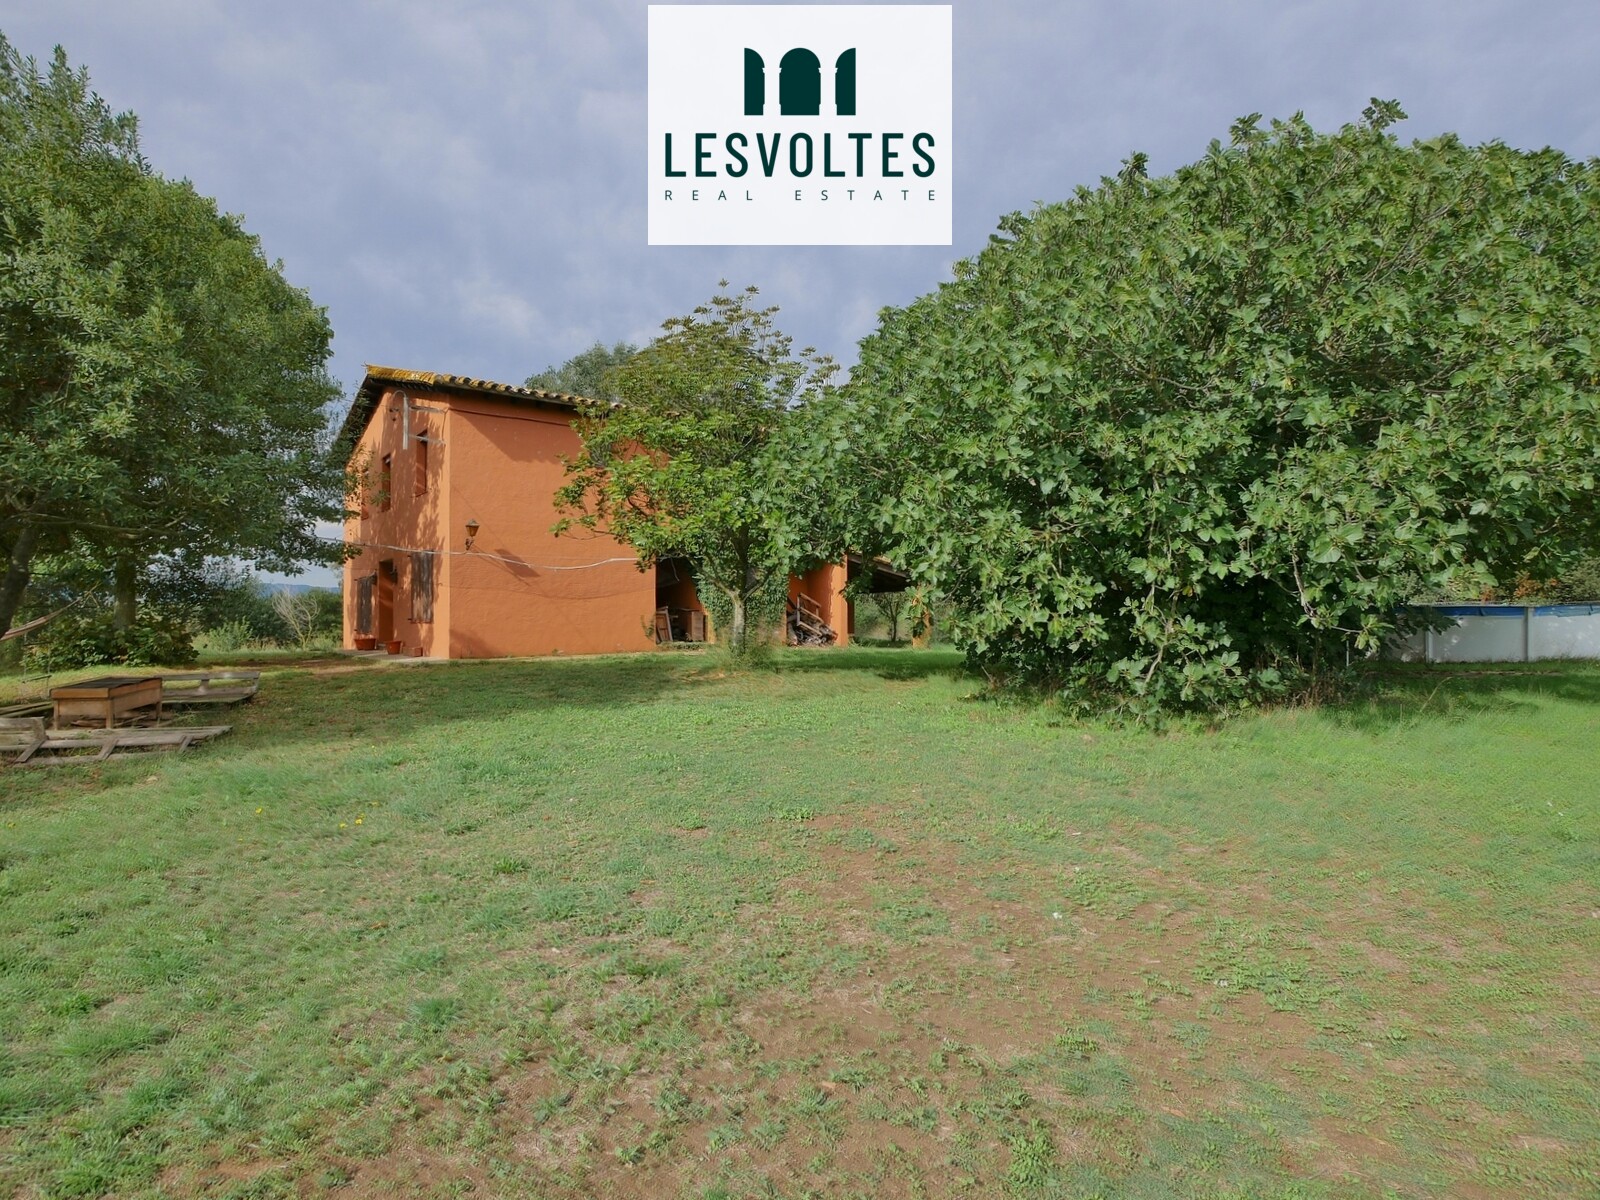 SINGLE-FAMILY HOUSE OF 349 M2 WITH 45,000 M2 OF LAND, FOREST AND CROP FIELDS, FOR SALE IN FORALLAC, BAIX EMPORDÀ.